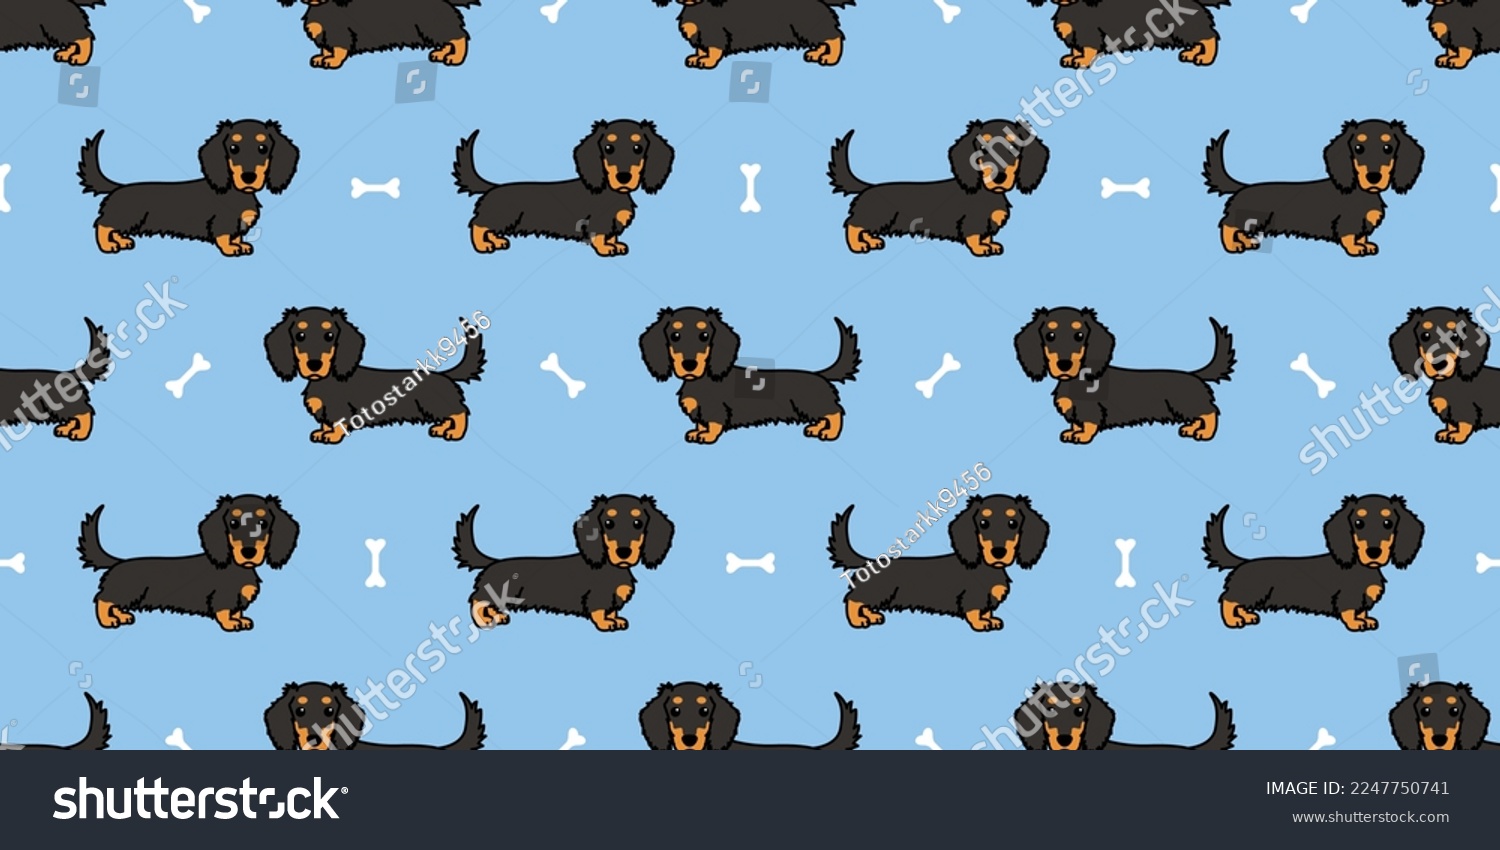 SVG of Cute long haired dachshund dog black and tan cartoon seamless patern, vector illustration svg